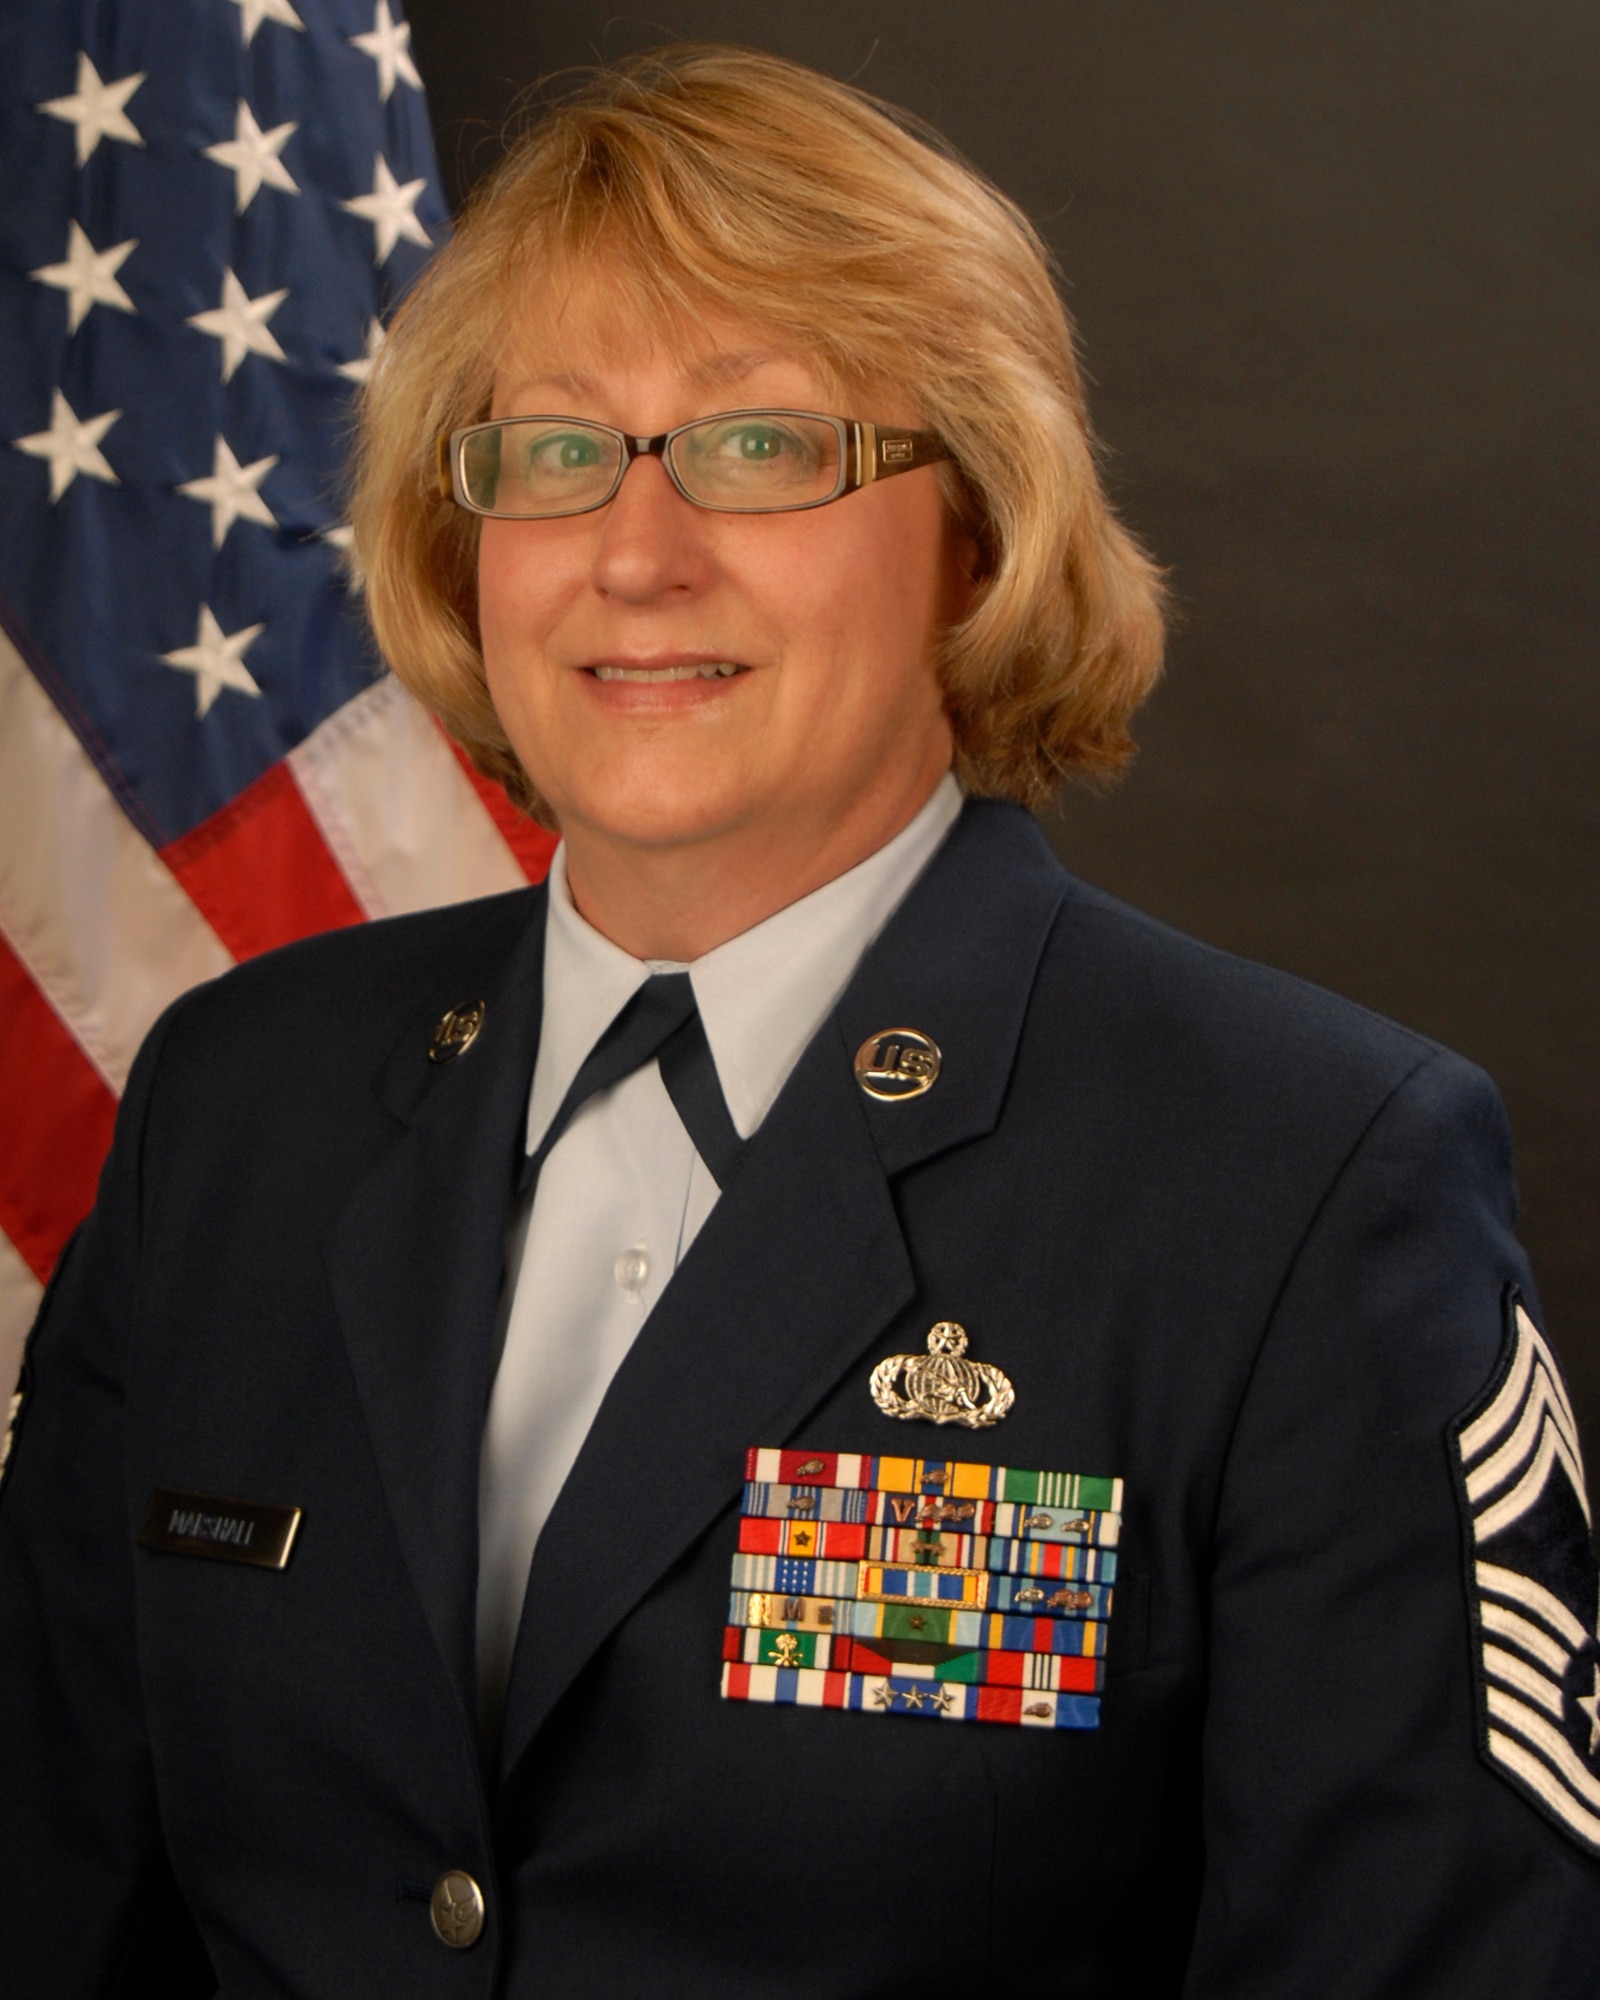 Portrait of Chief Master Sgt Deborah Marshall, Chief of the 169th Force Support Squadron.

(SCANG Photo by:  Senior Master Sgt Edward Snyder, 21 June 2011 - RELEASED)